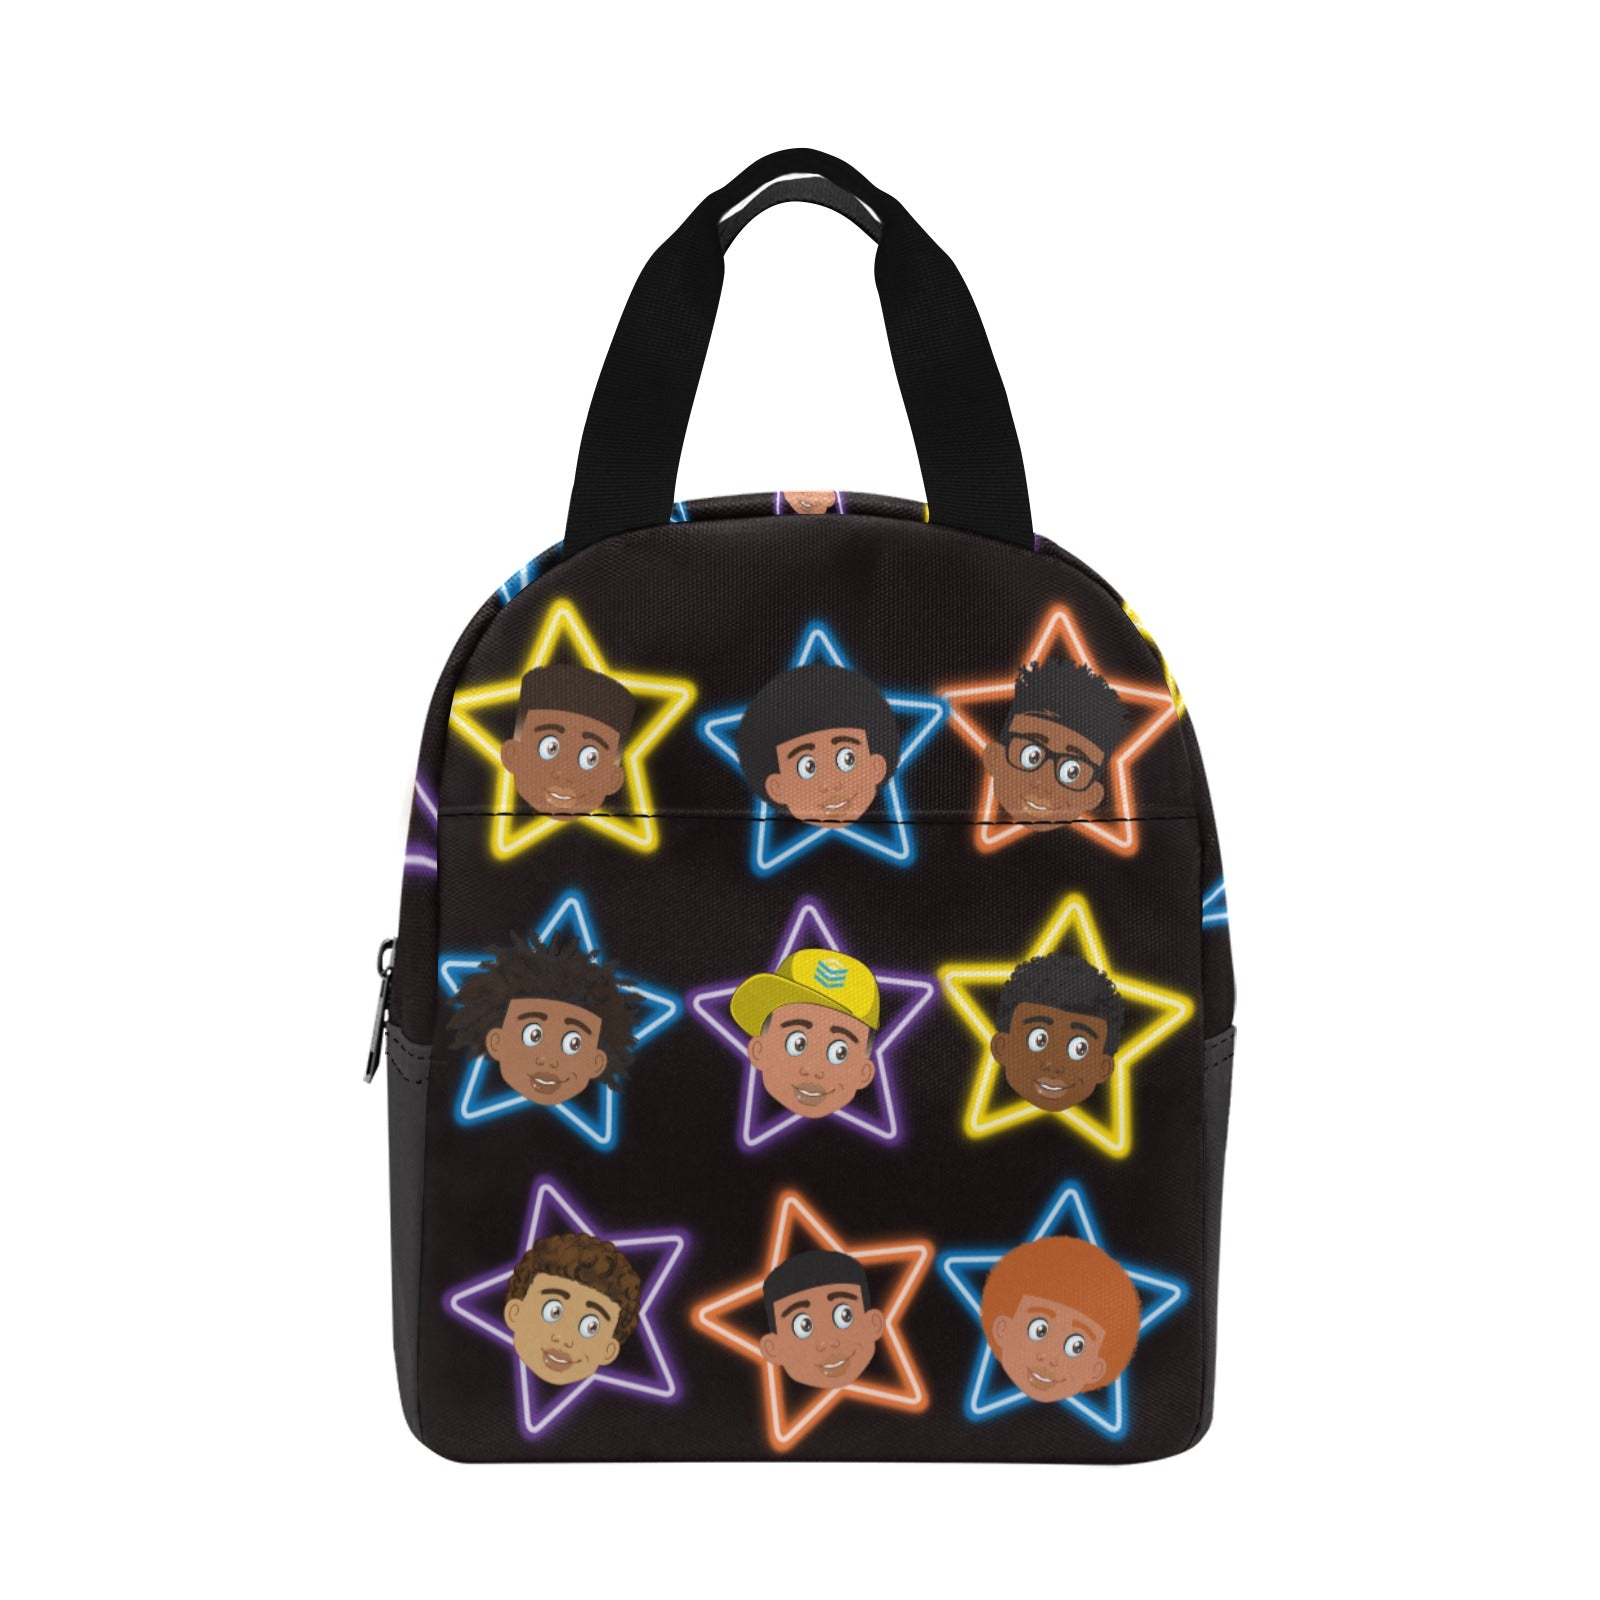 Adonis Light Weight And Stylish Lunch Bag For Kids, Girls & Boys